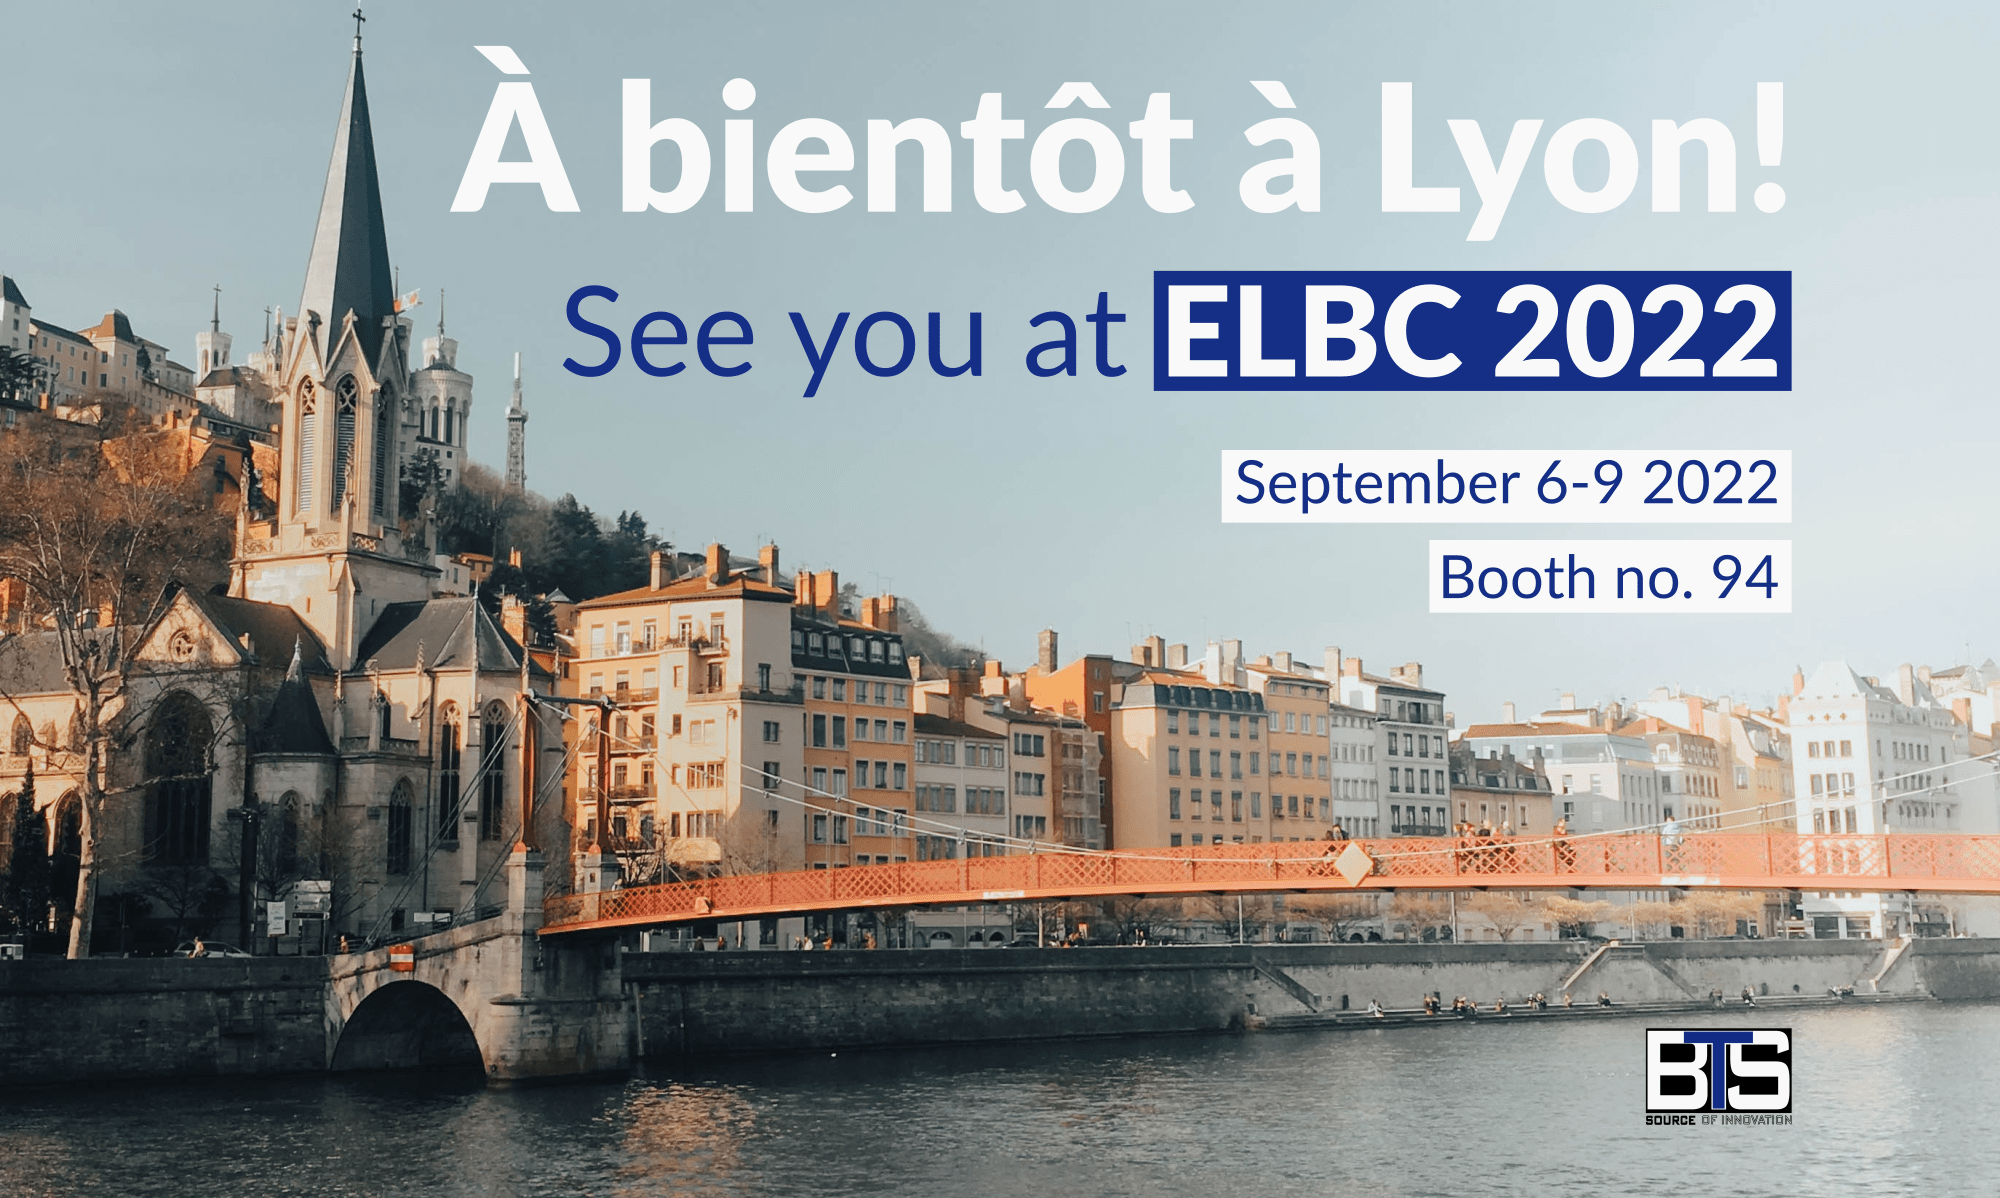 Stay tuned for more information on next year's ELBC